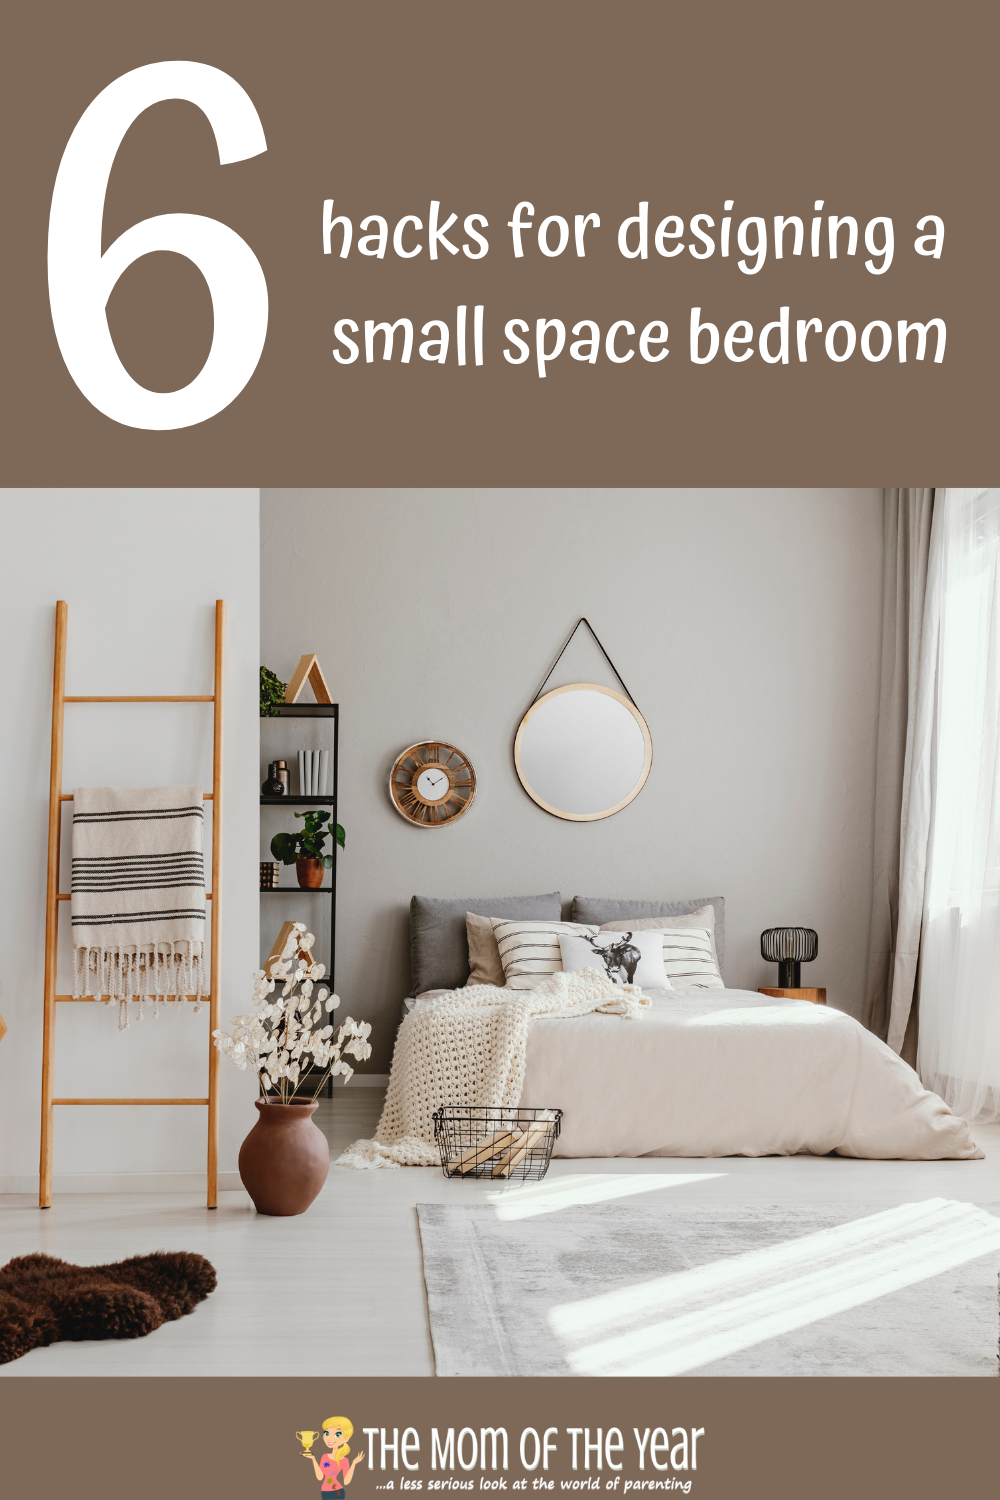 6 Tips for Designing a Small Space Bedroom - The Mom of the Year